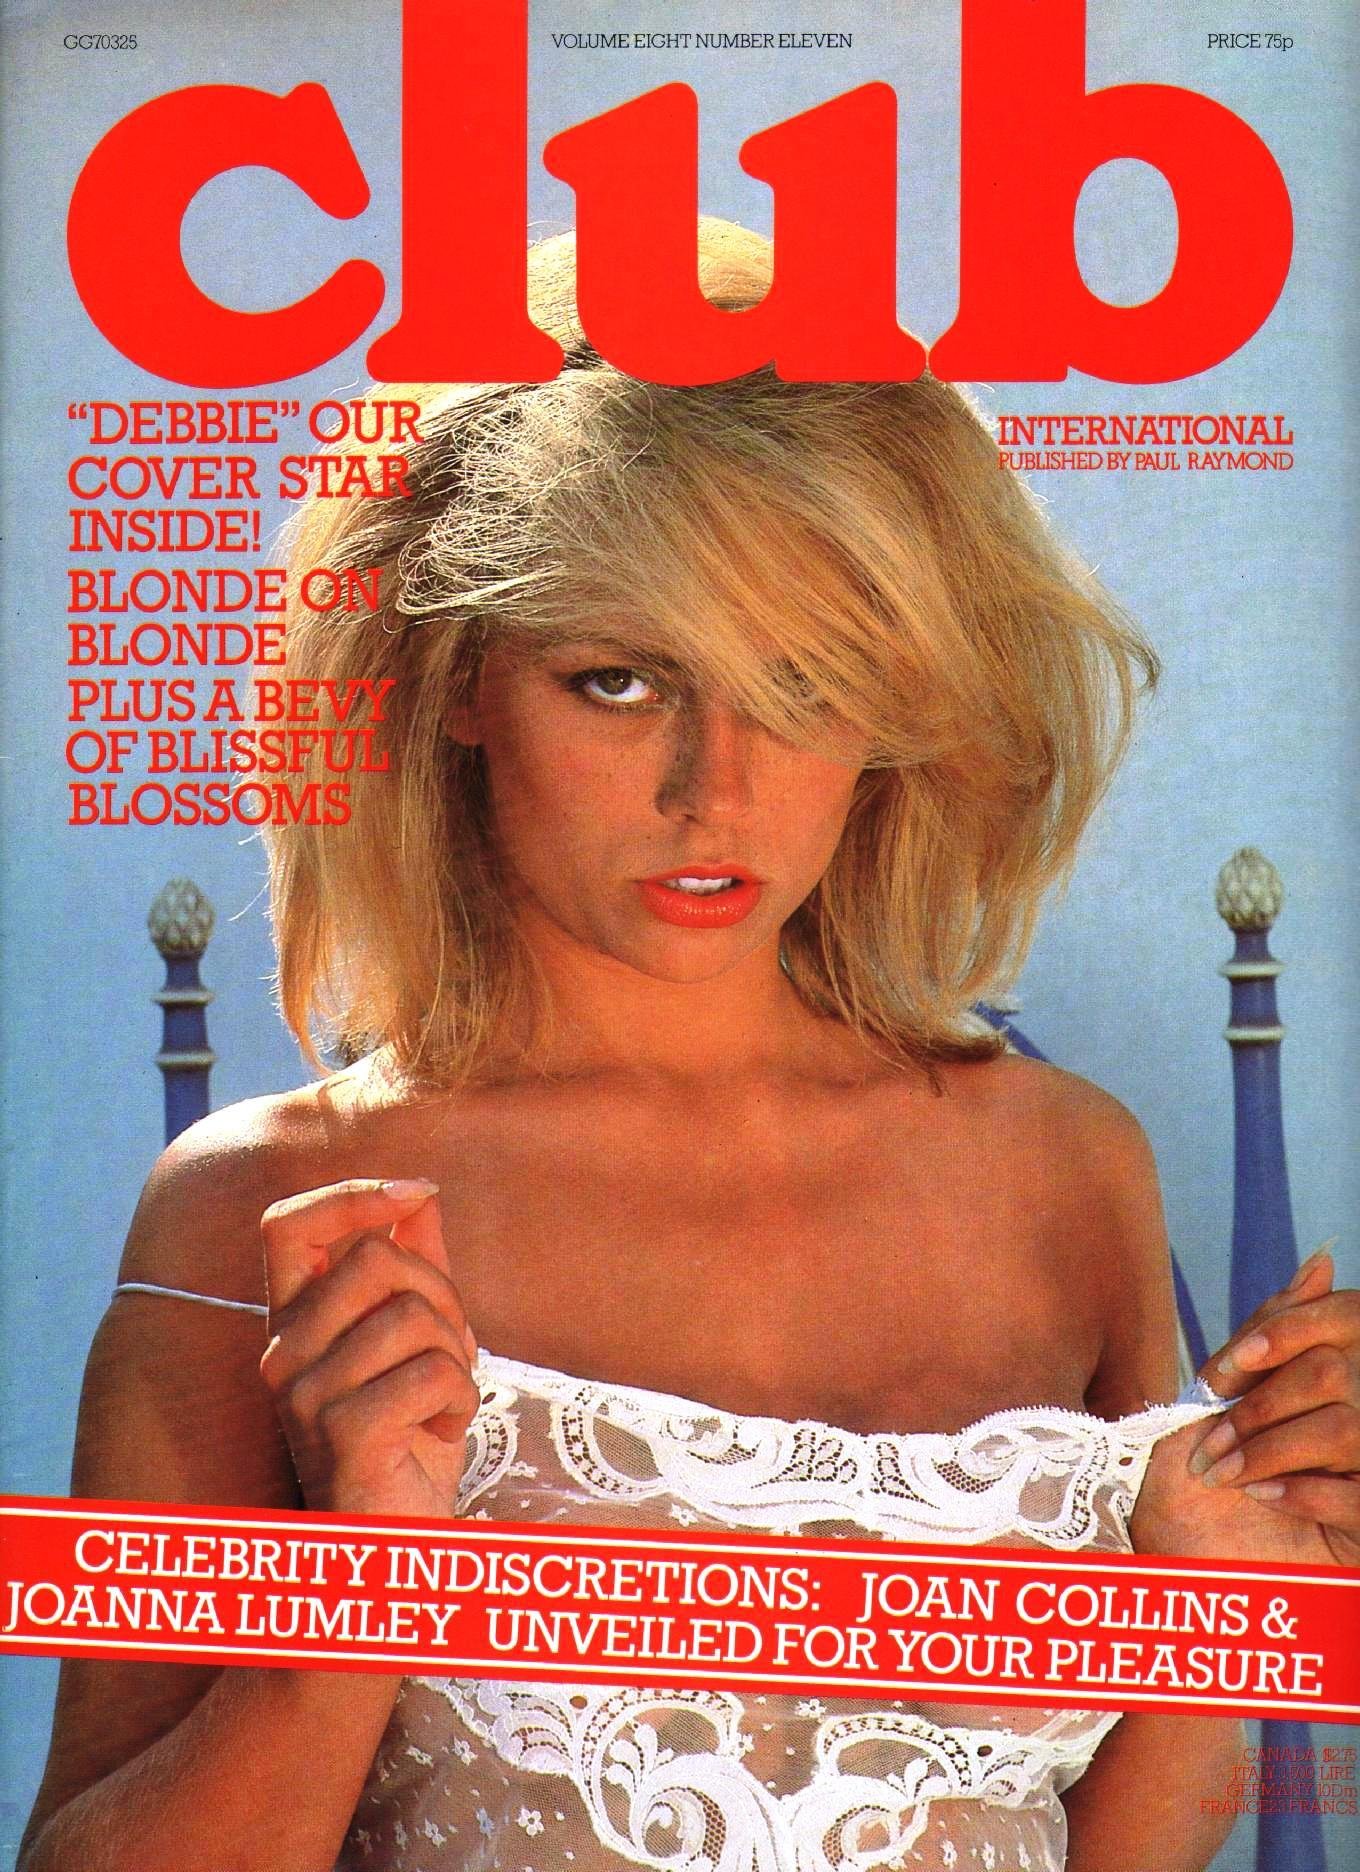 Club International UK Vol. 8 # 11 magazine back issue Club International UK magizine back copy Club International UK Vol. 8 # 11 Vintage Adult Magazine Back Issue Published by Paul Raymond Publishing Group. Debbie Our Cover Star Inside! Blonde On Blonde Plus A Bevy Of Blissful Blossoms.